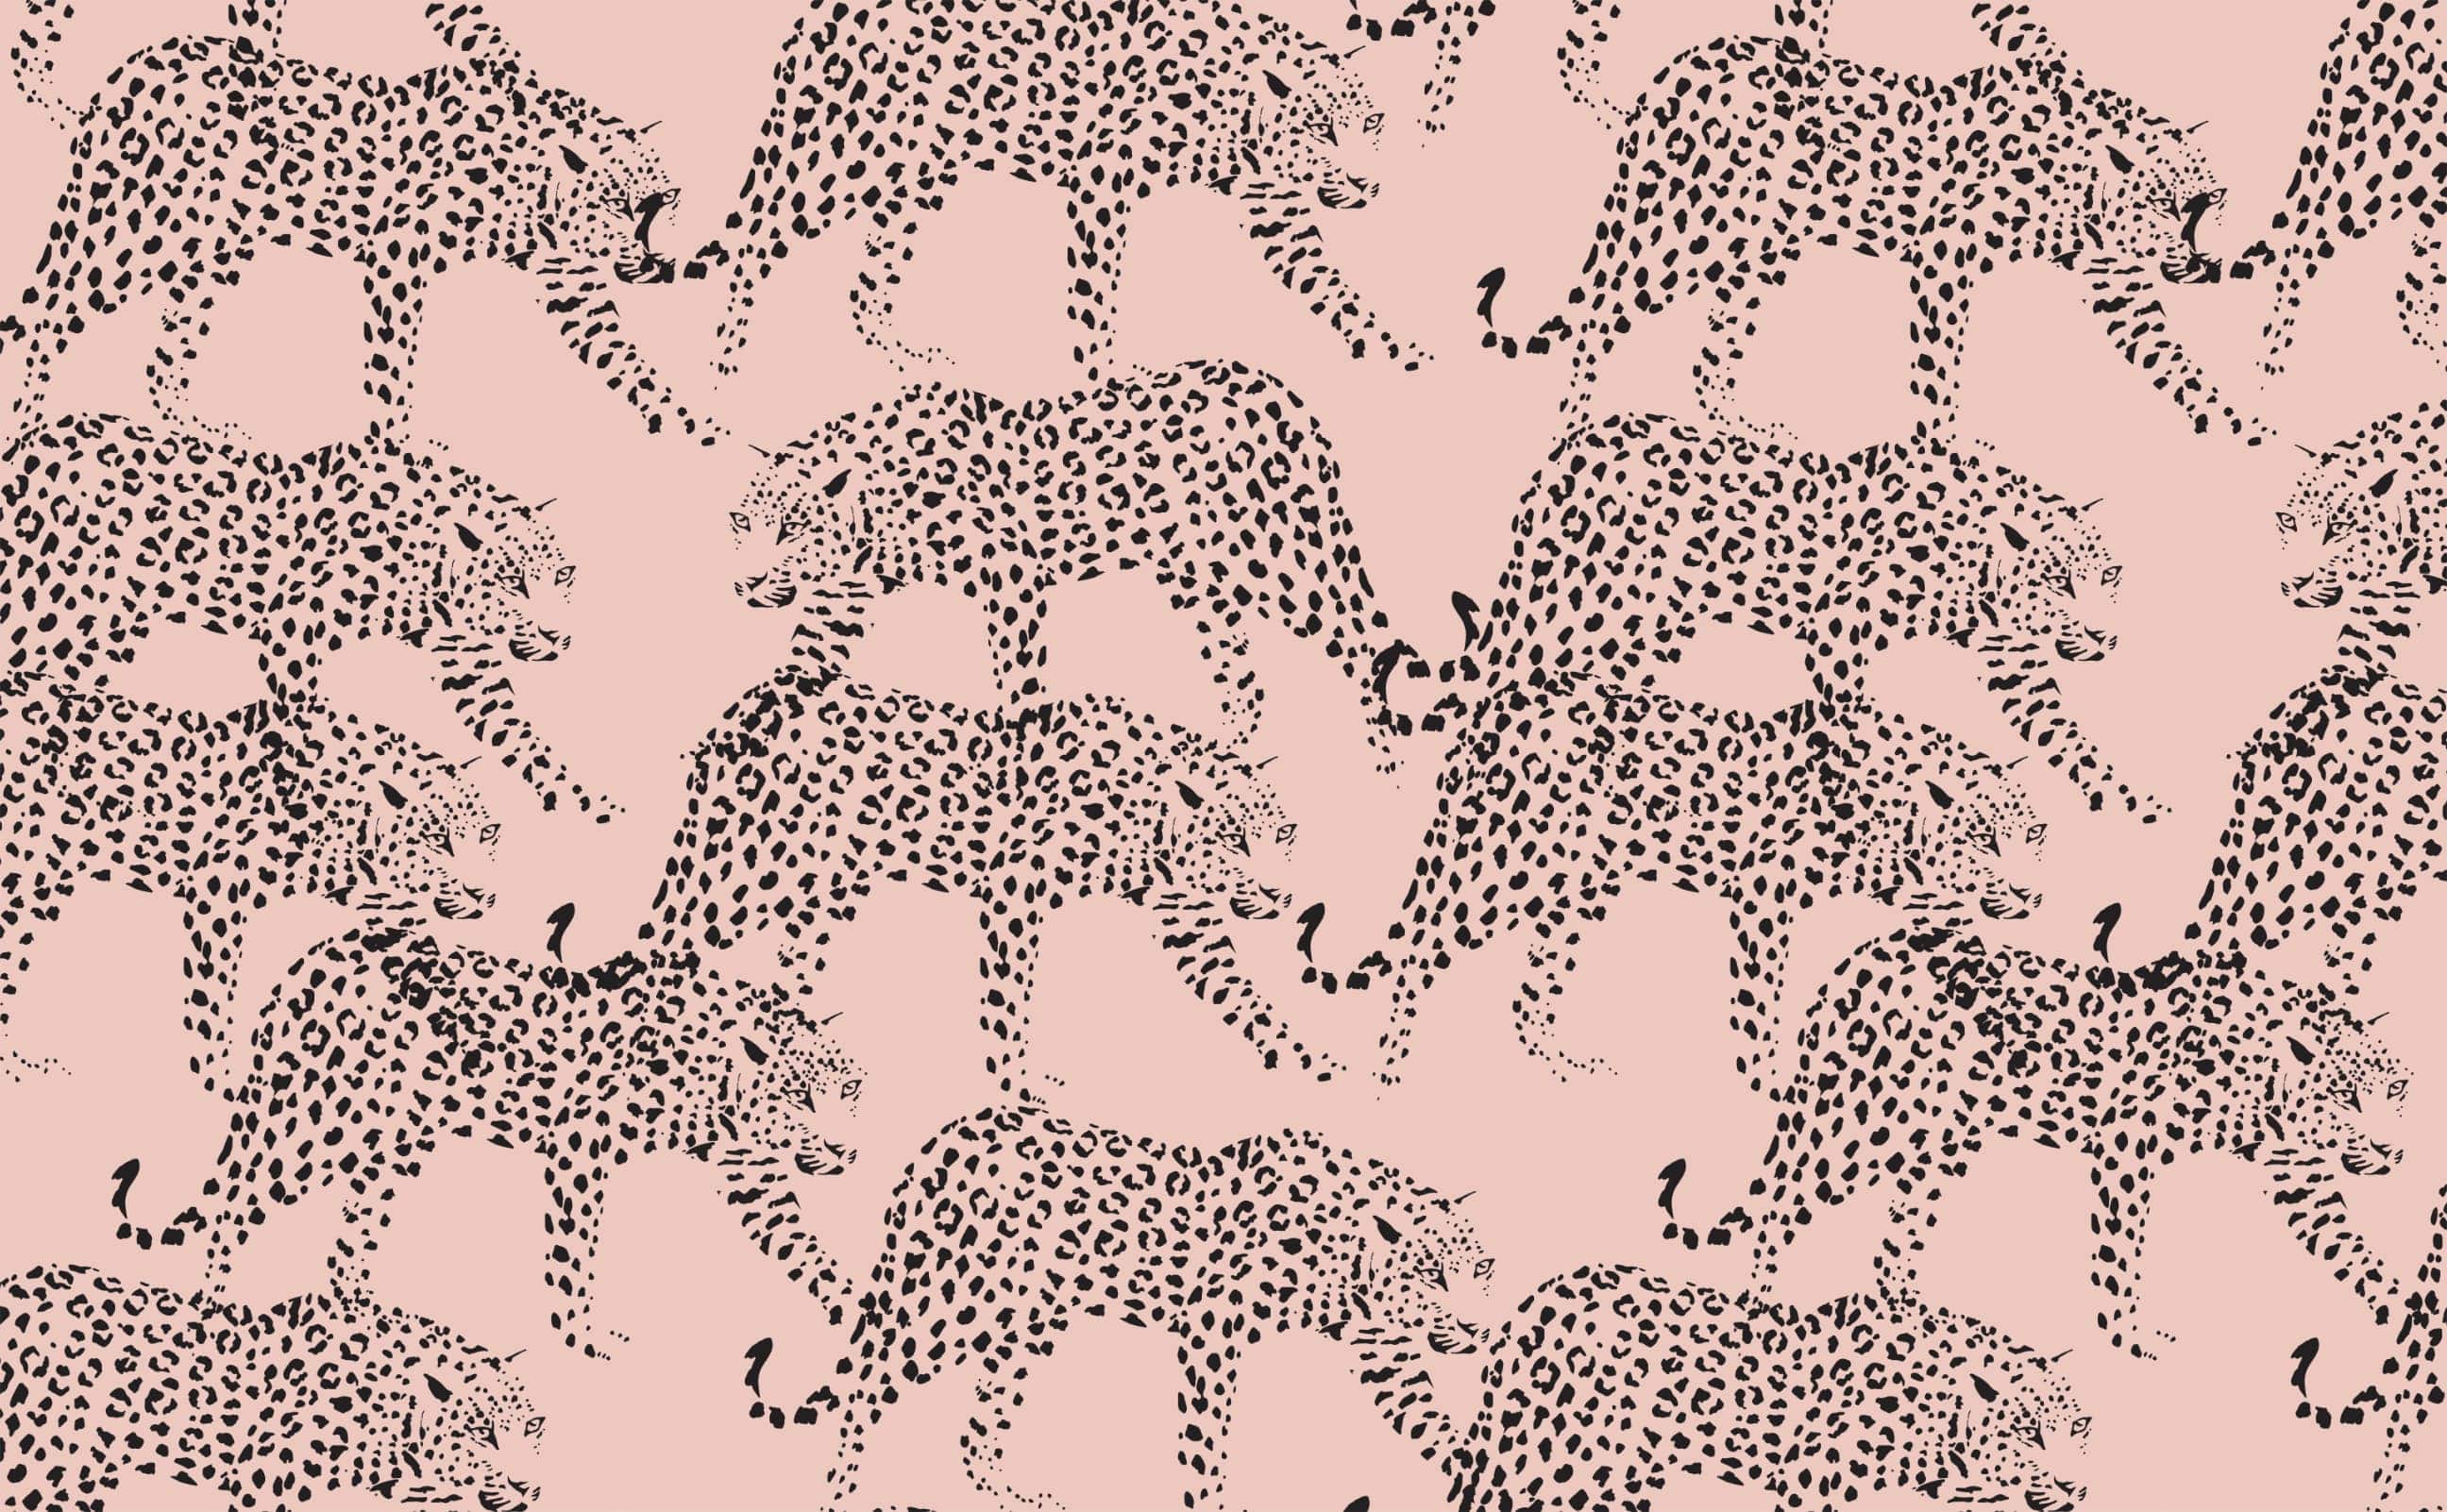  Leopardenmuster Hintergrundbild 2592x1602. Dusty rose with black leopard illustrated overlay Pattern Wallpaper for Walls. Prowl and Purr